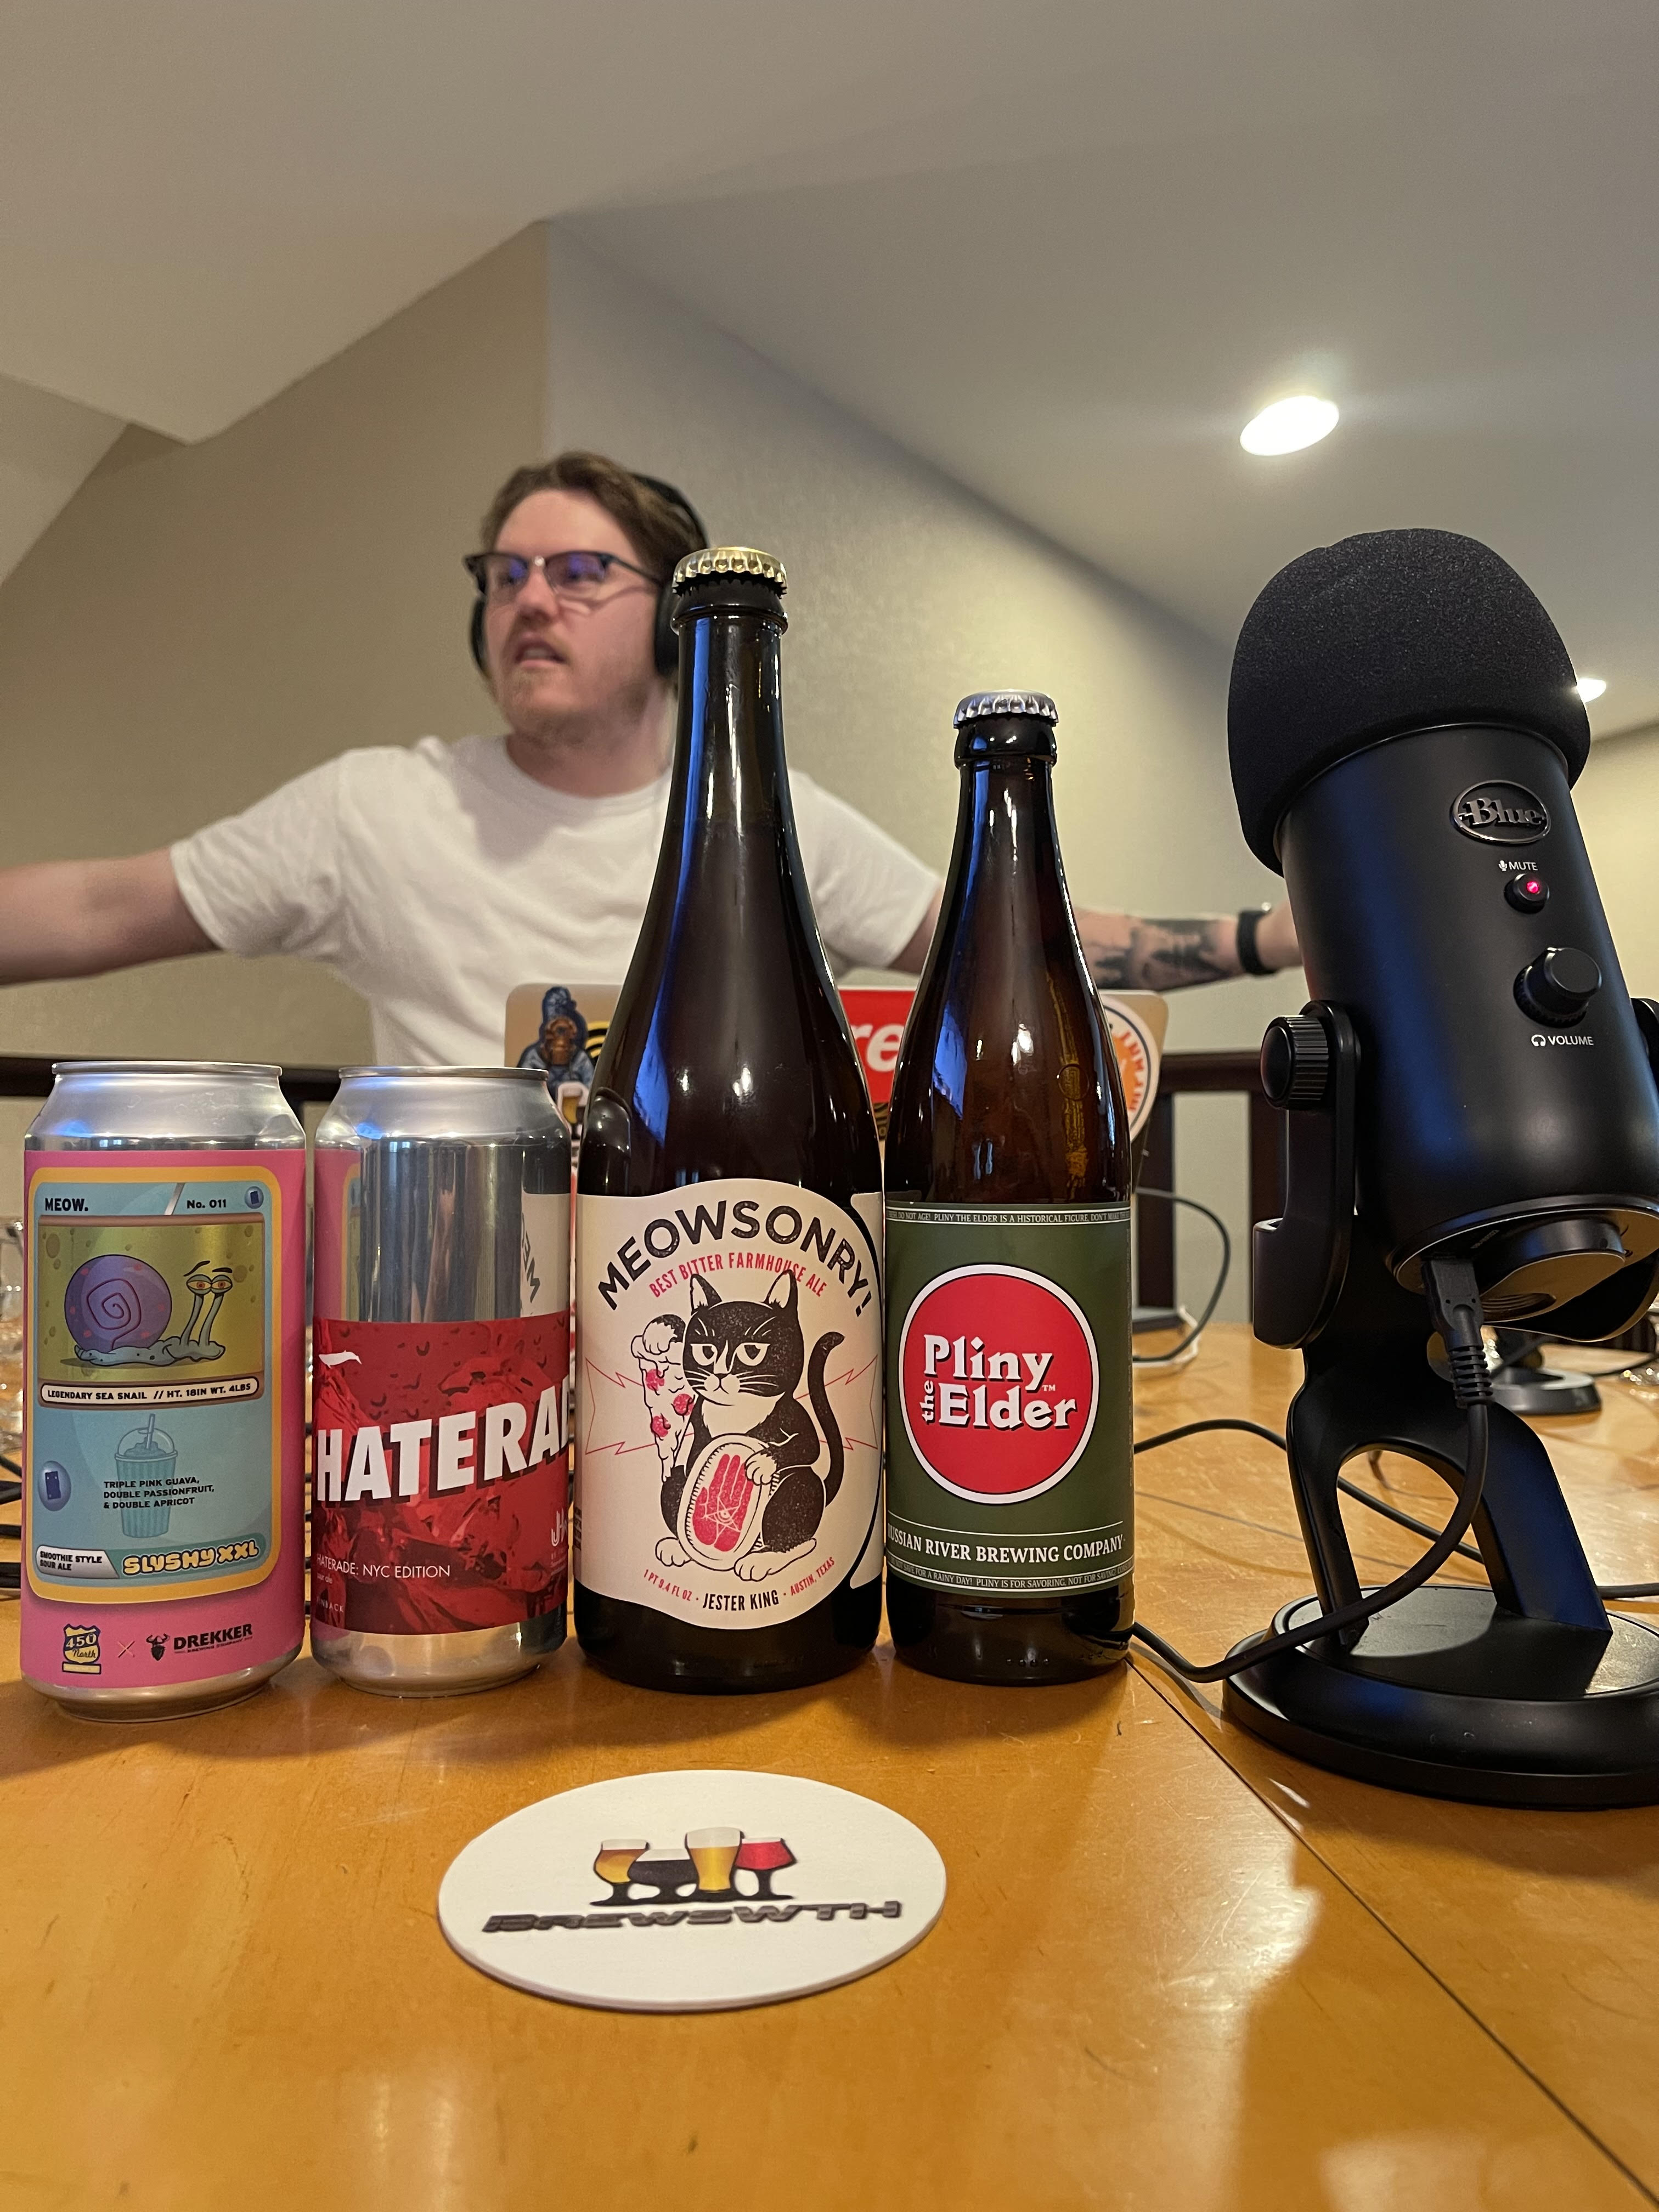 More variety, beer trading, the masters, and upcoming events